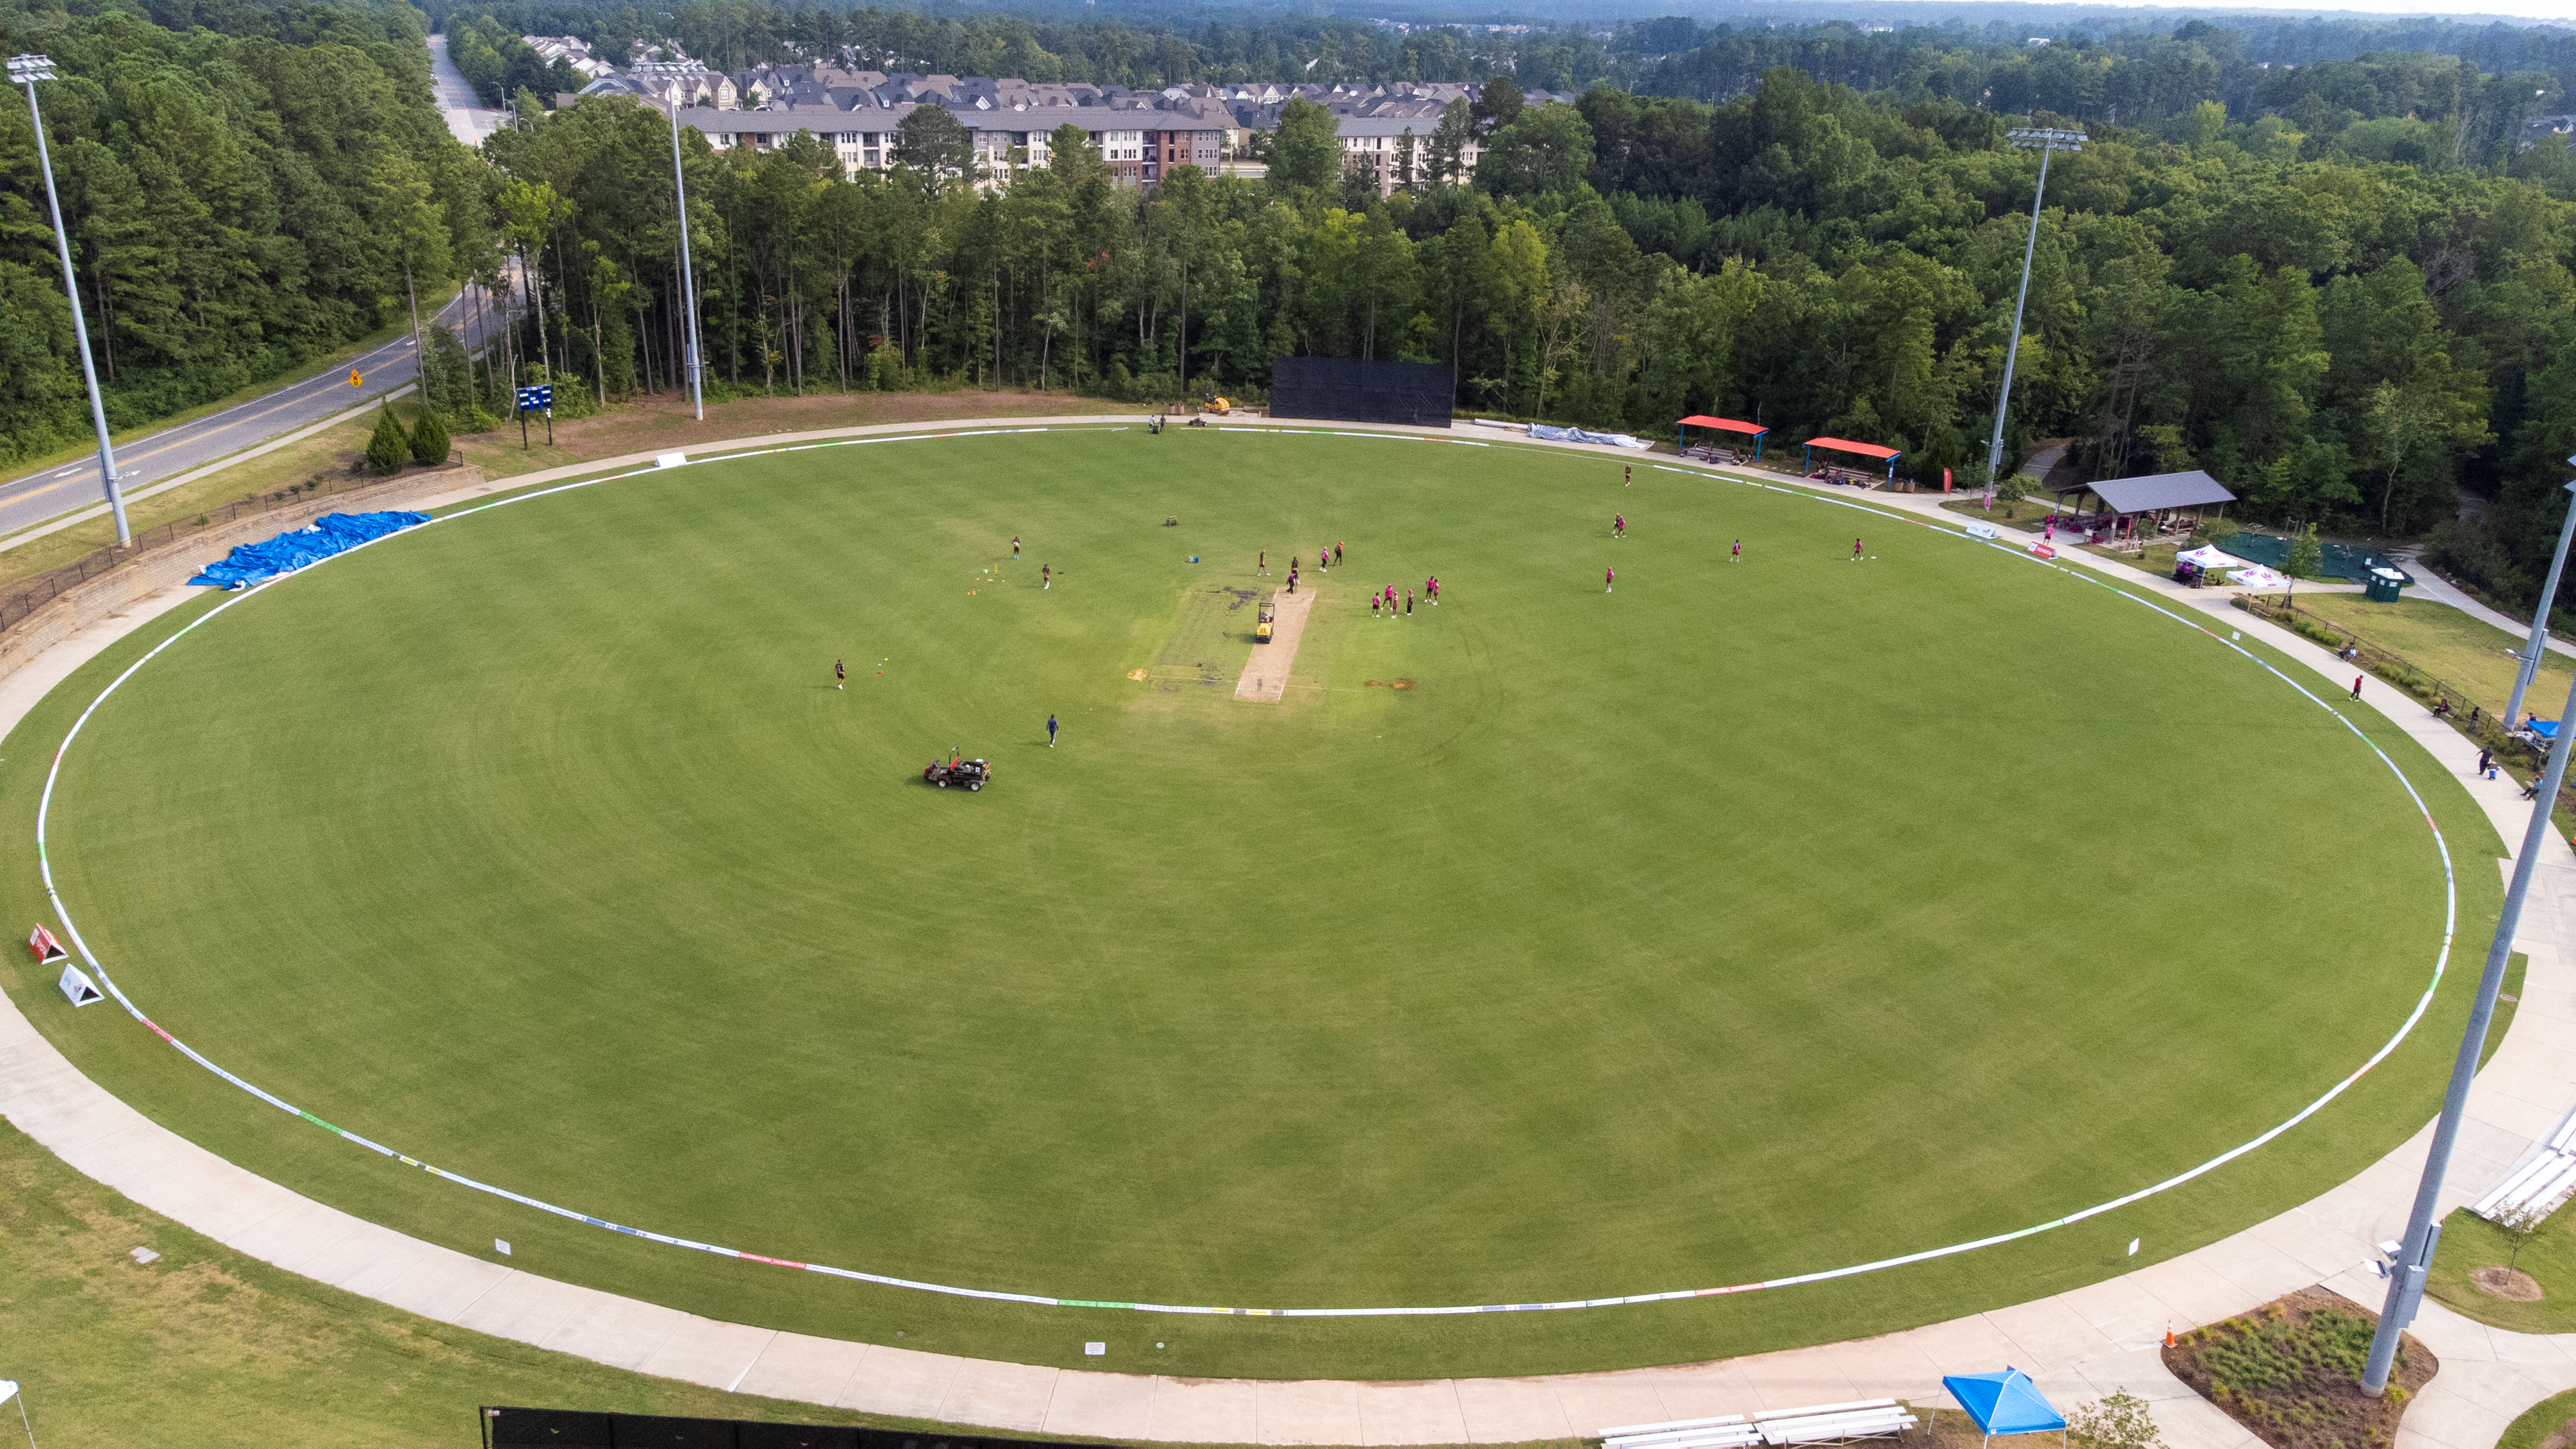 Minor League Cricket Finals to be held in Morrisville, North Carolina